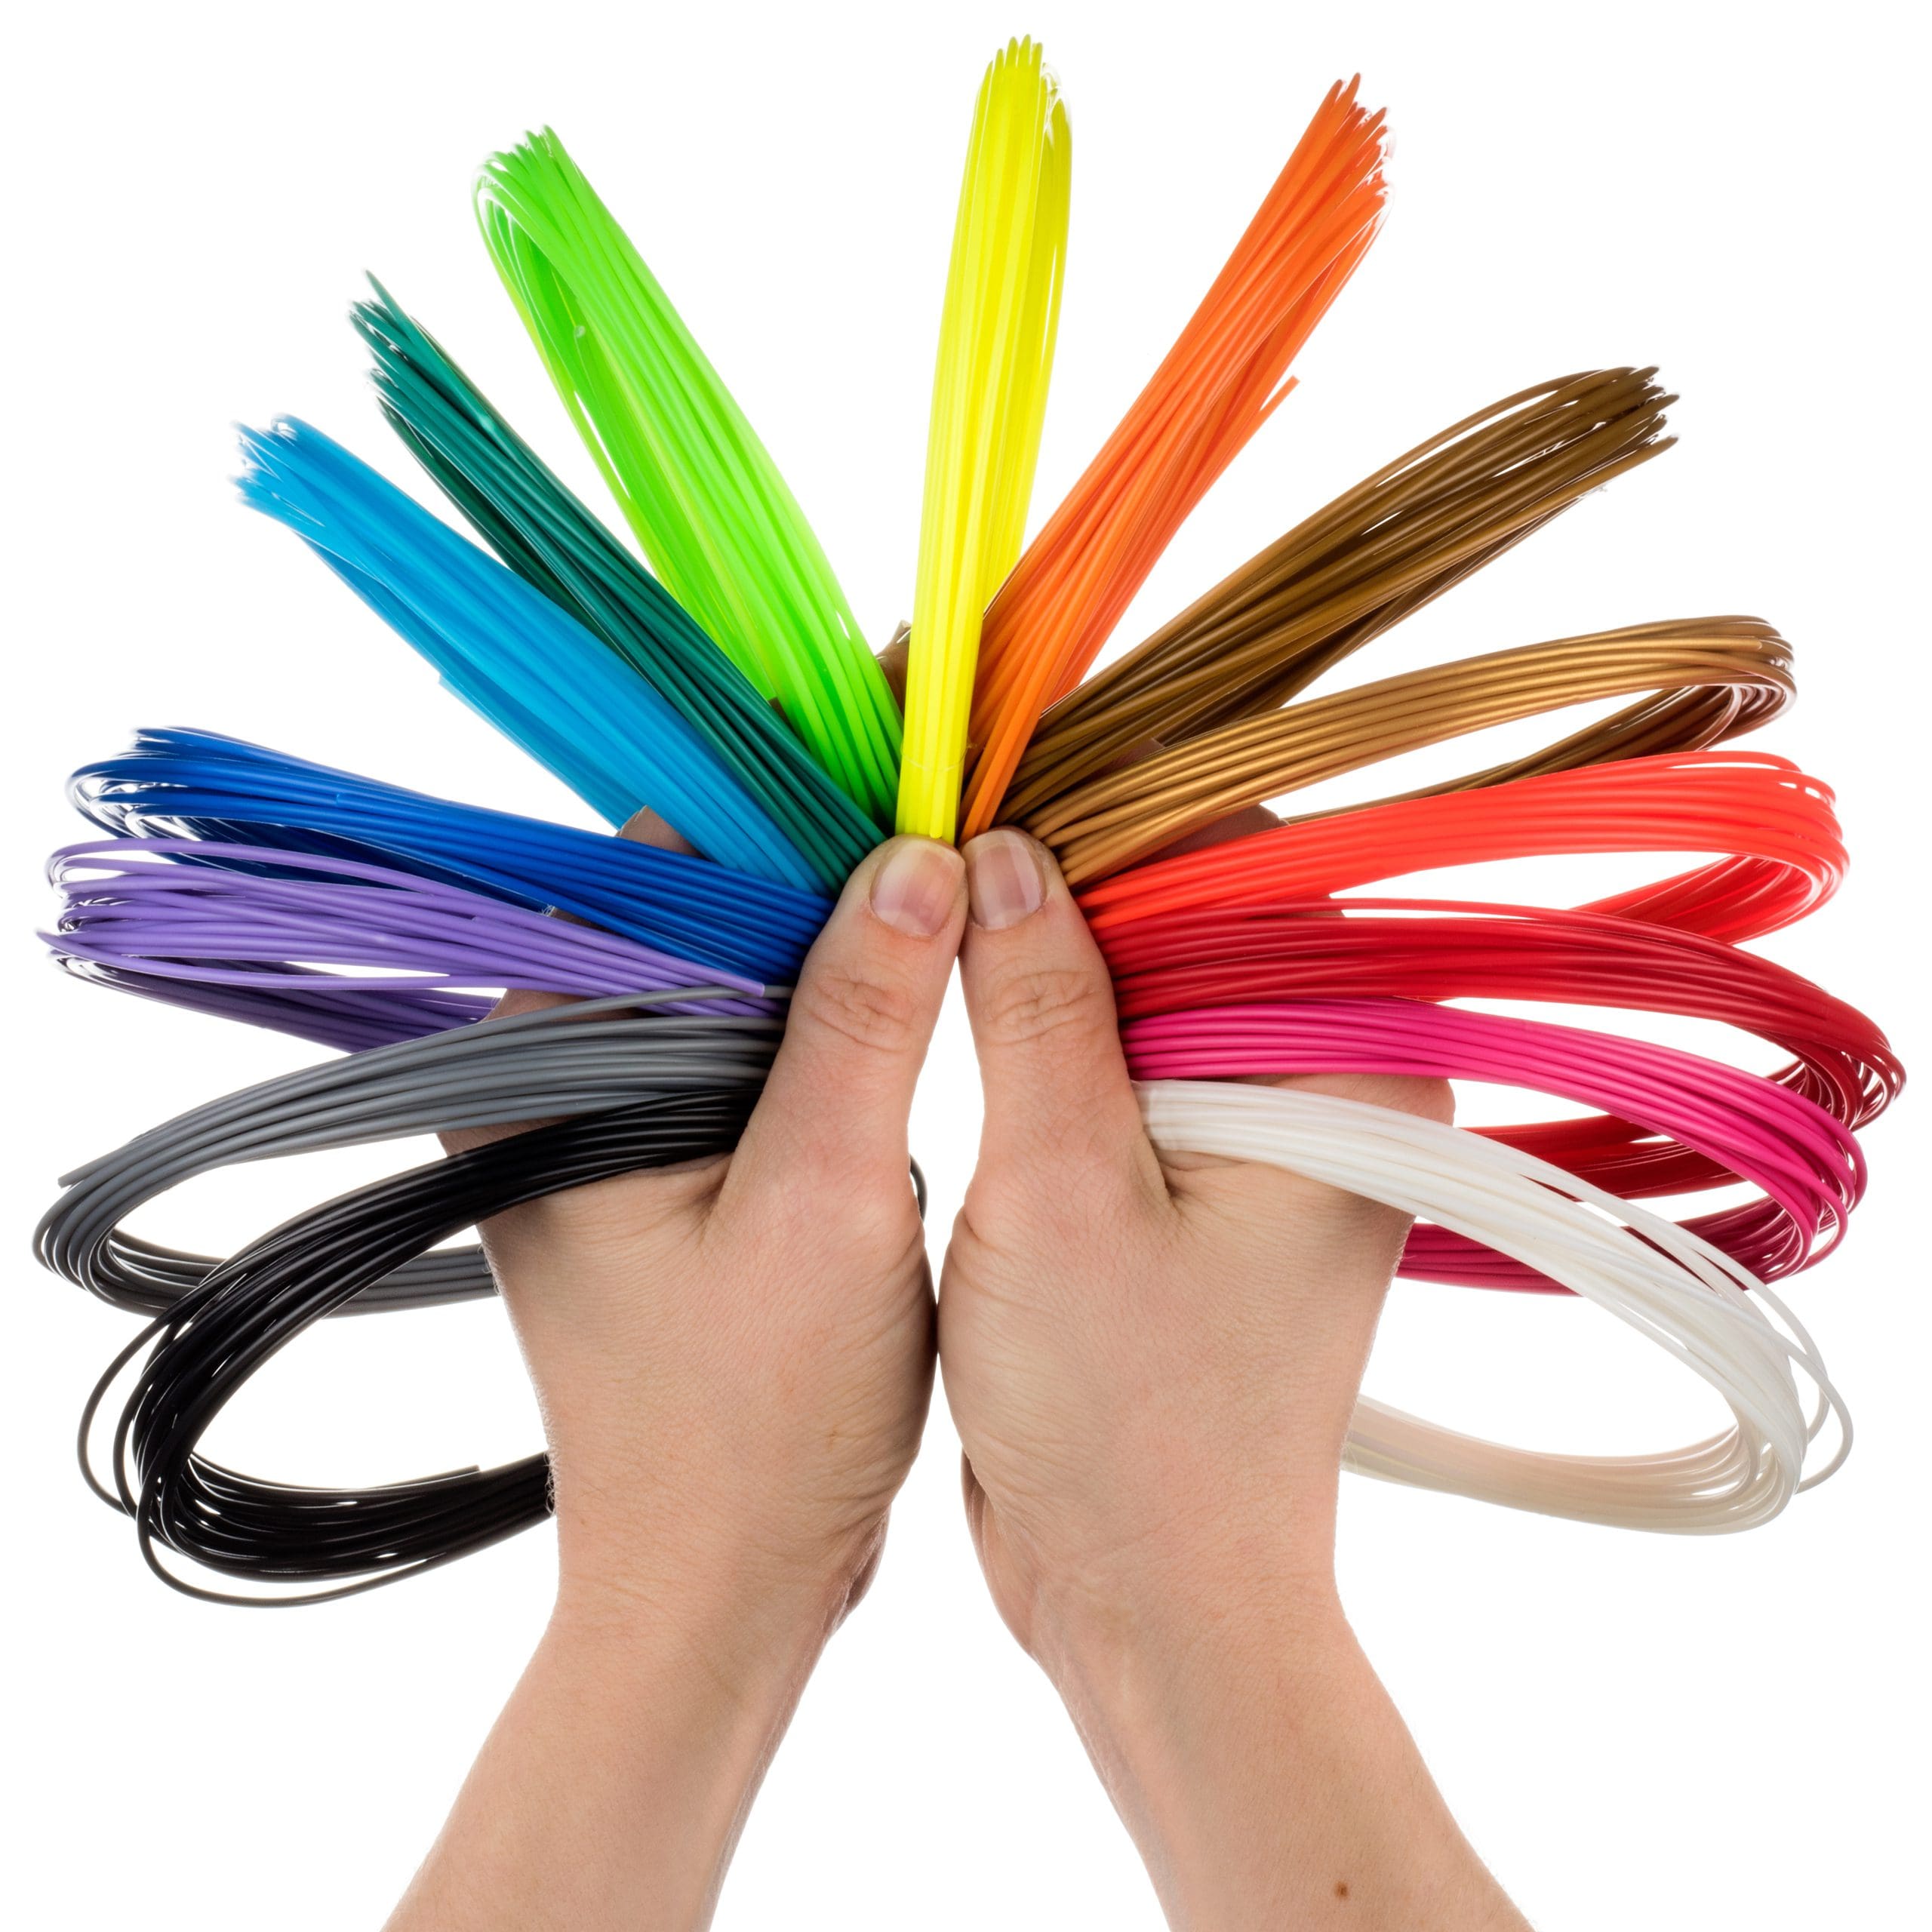 Professional hand modeling product photo showing two hands holding 3D printer filaments in various colors.